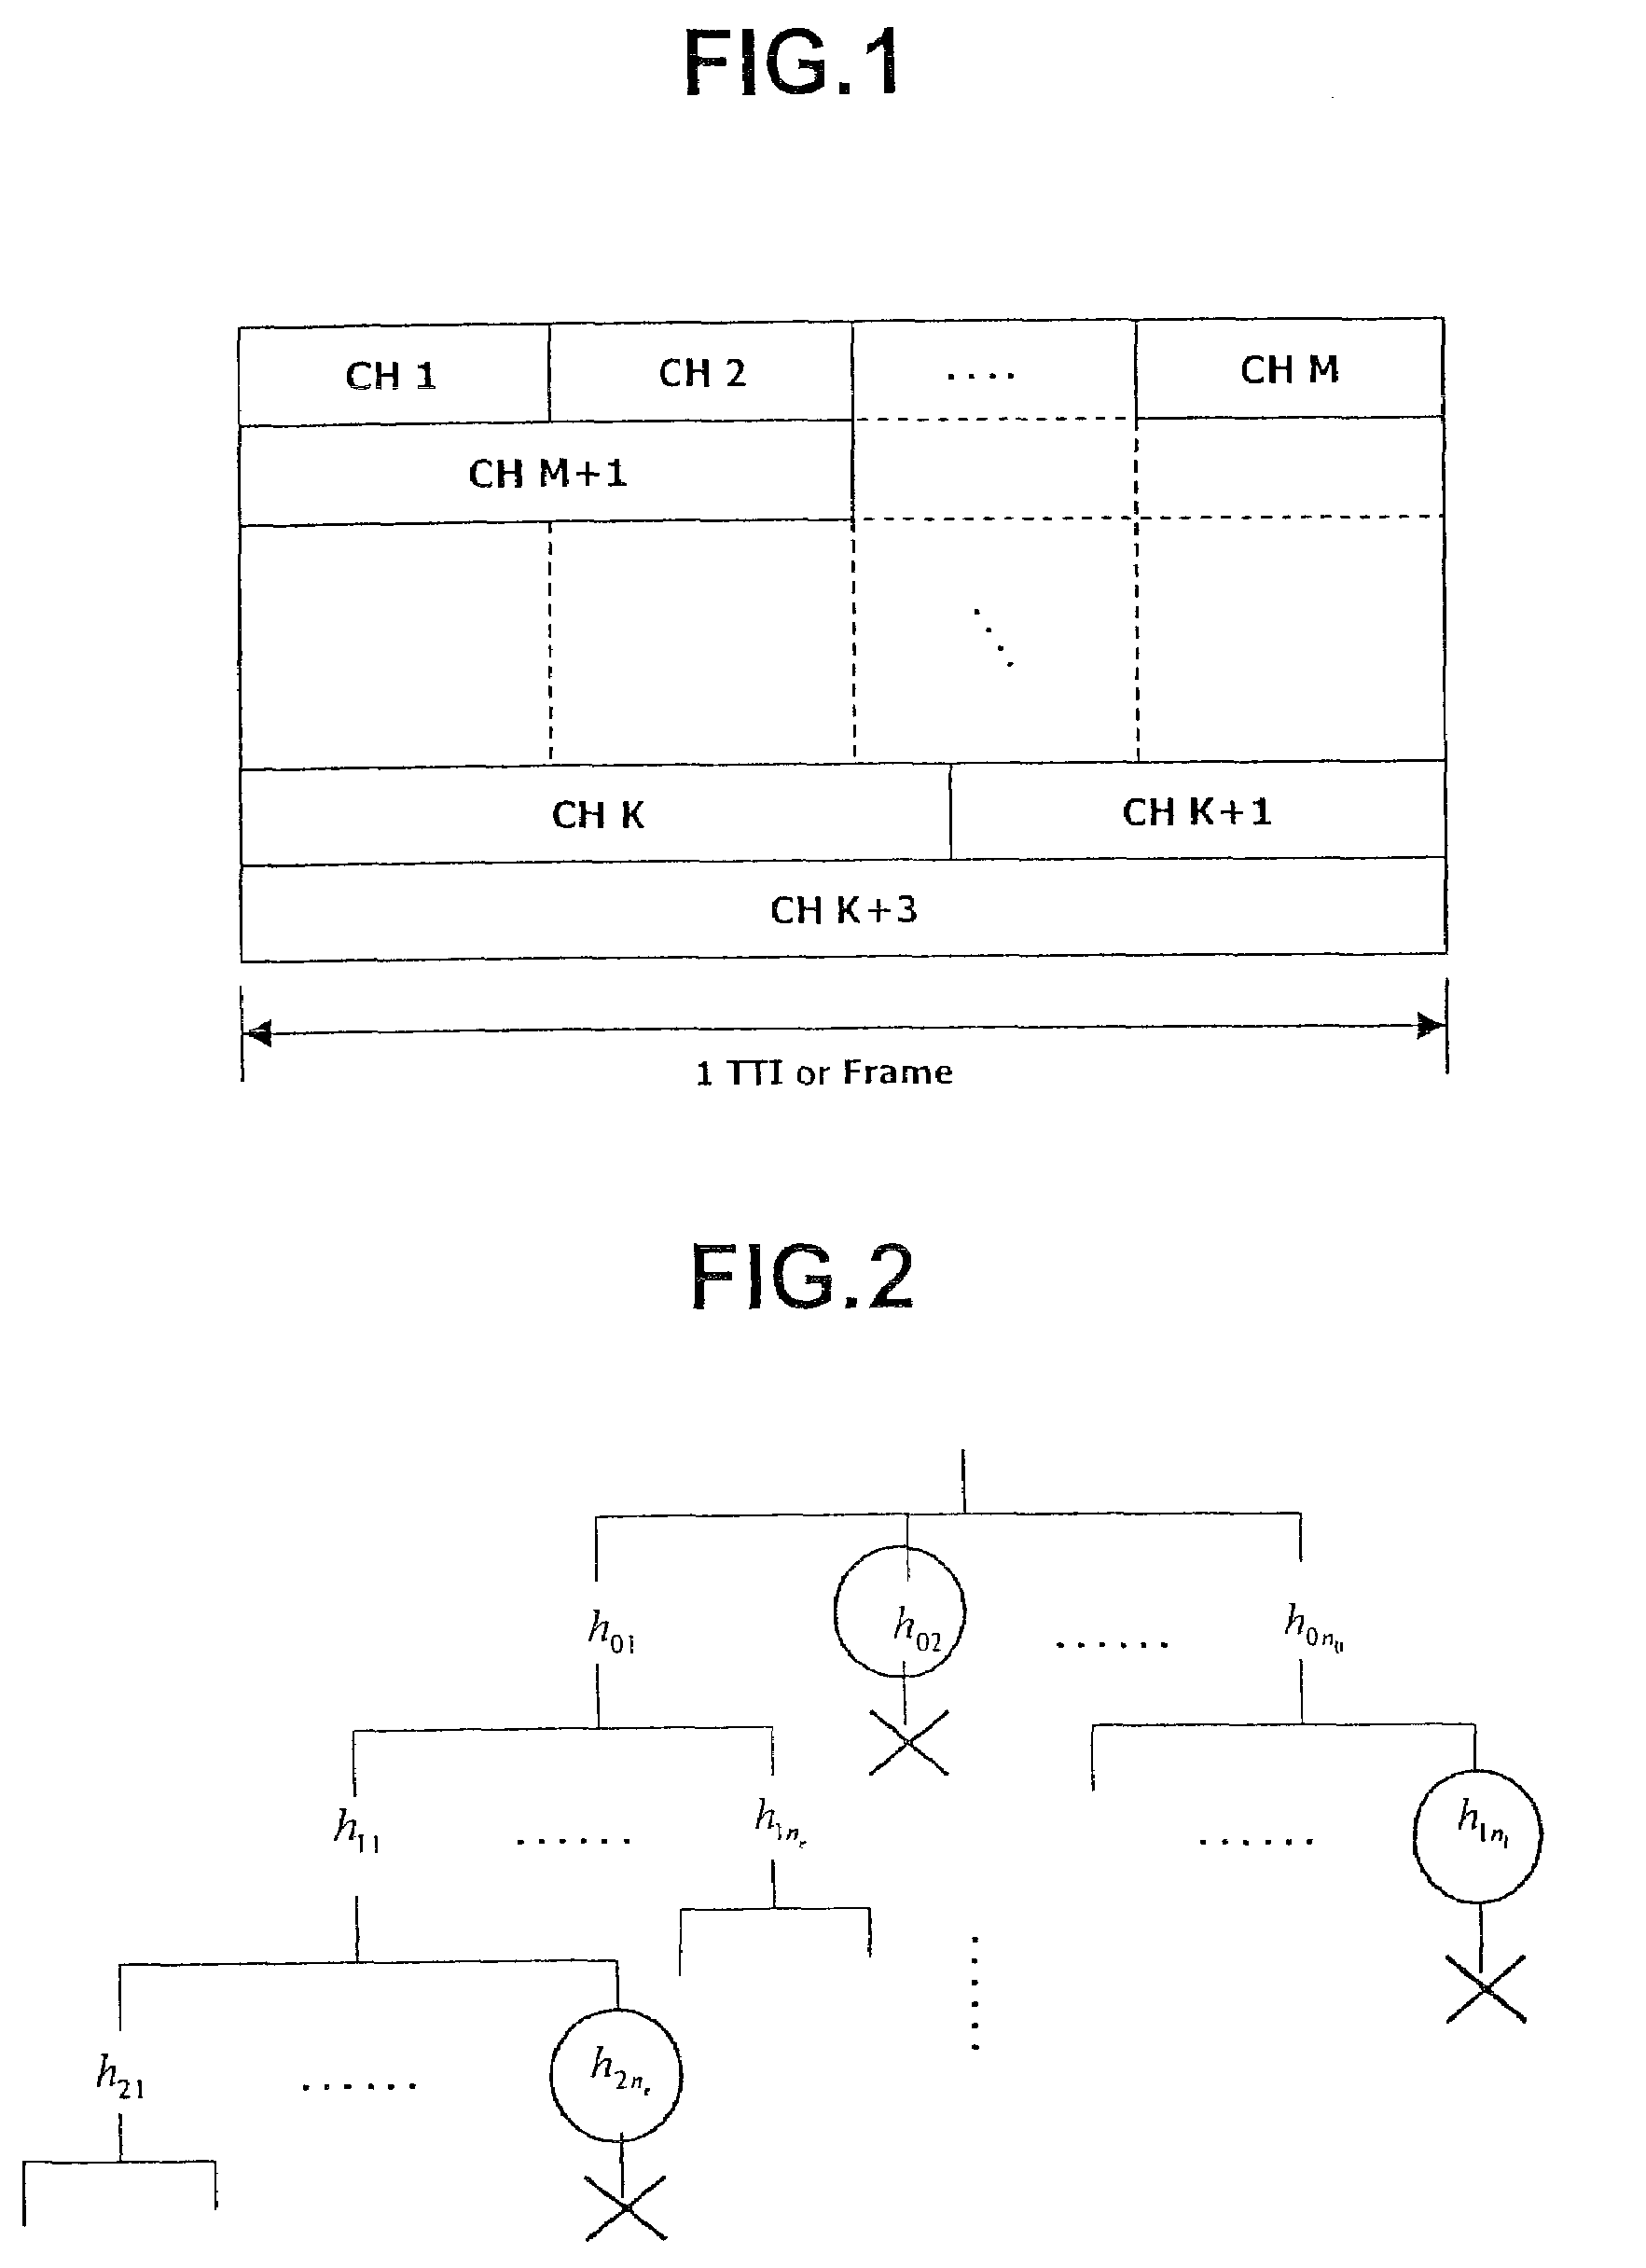 Downlink control channel allocation method in mobile communication system